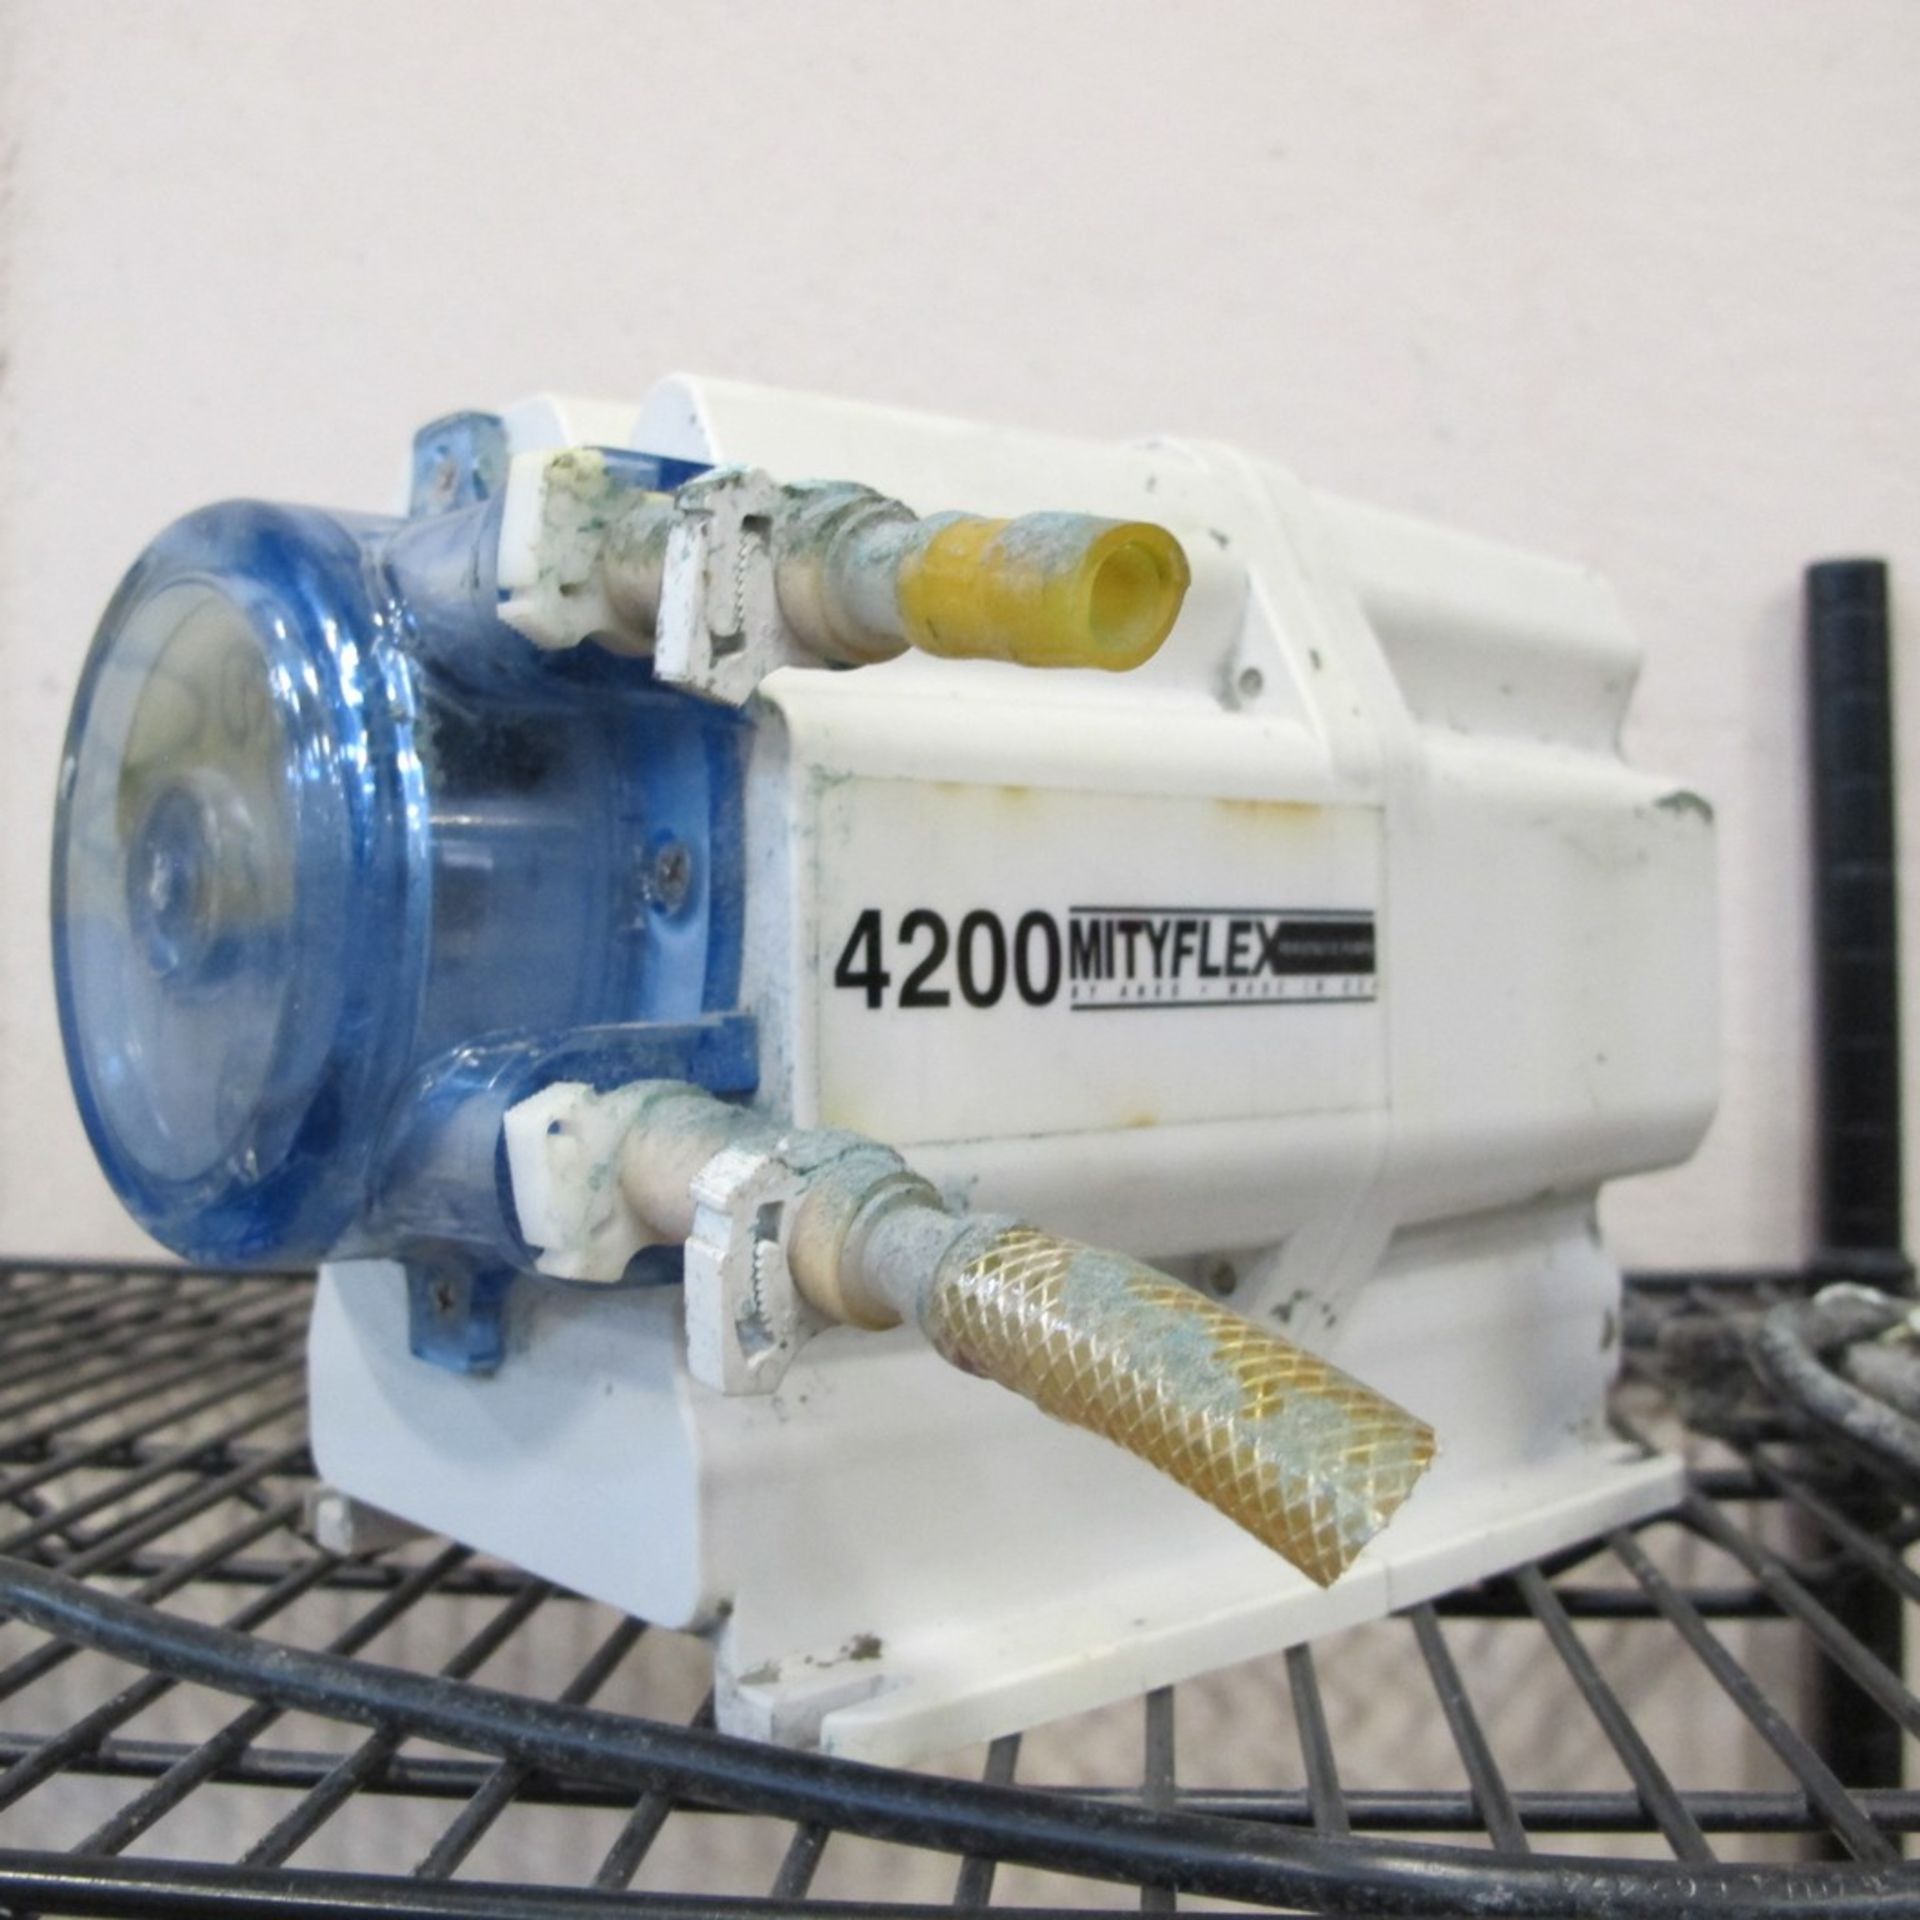 LOT OF (2) ANKO MITYFLEX 4200 PERISTALTIC PUMP W/ DIRECTIONAL CONTROLS (NORTH ELECTRICAL ROOM) - Image 3 of 5